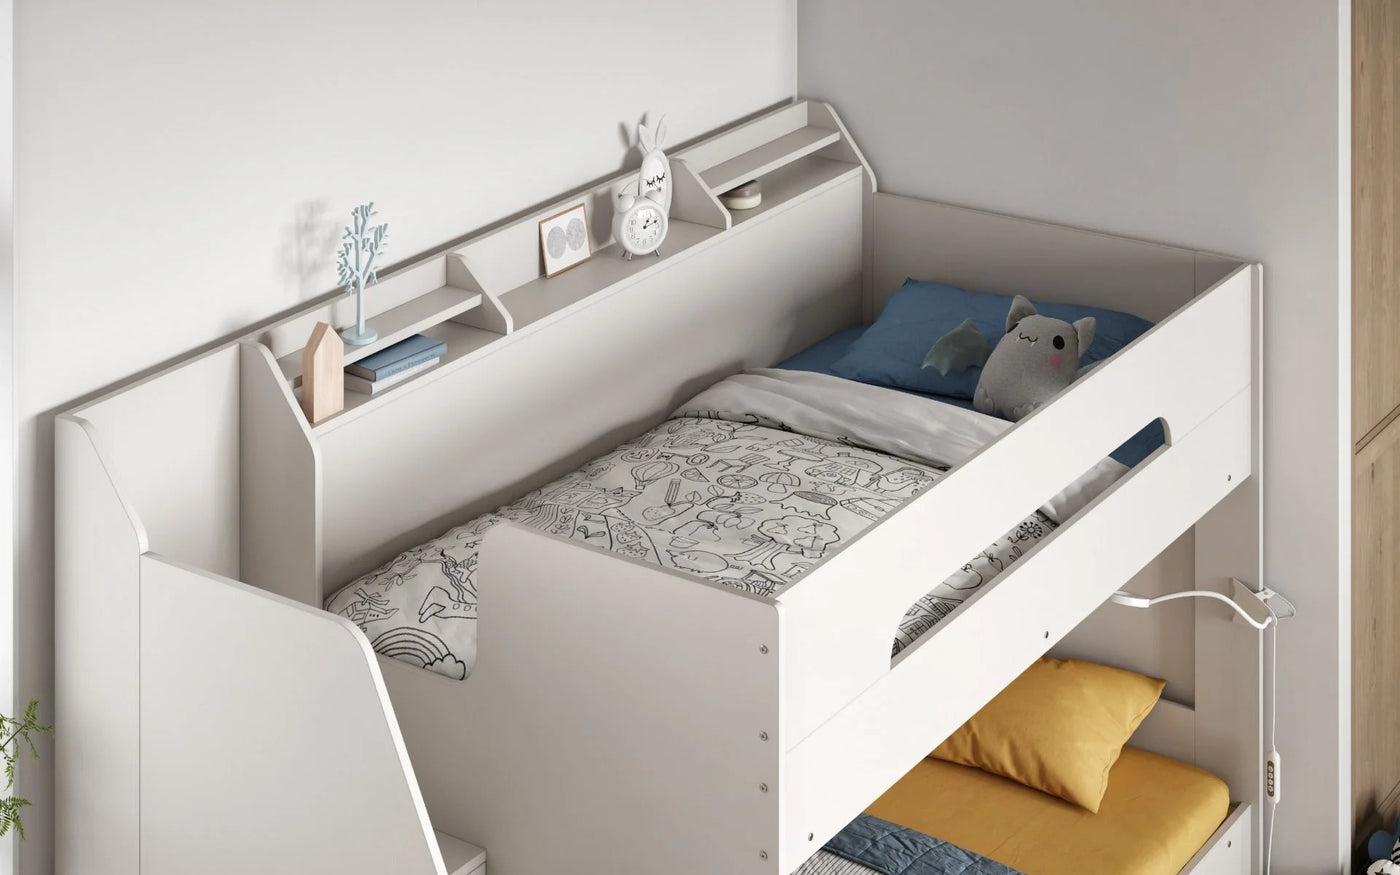 Flair-Slick-Staircase-Bunk-Bed-White-Top-View